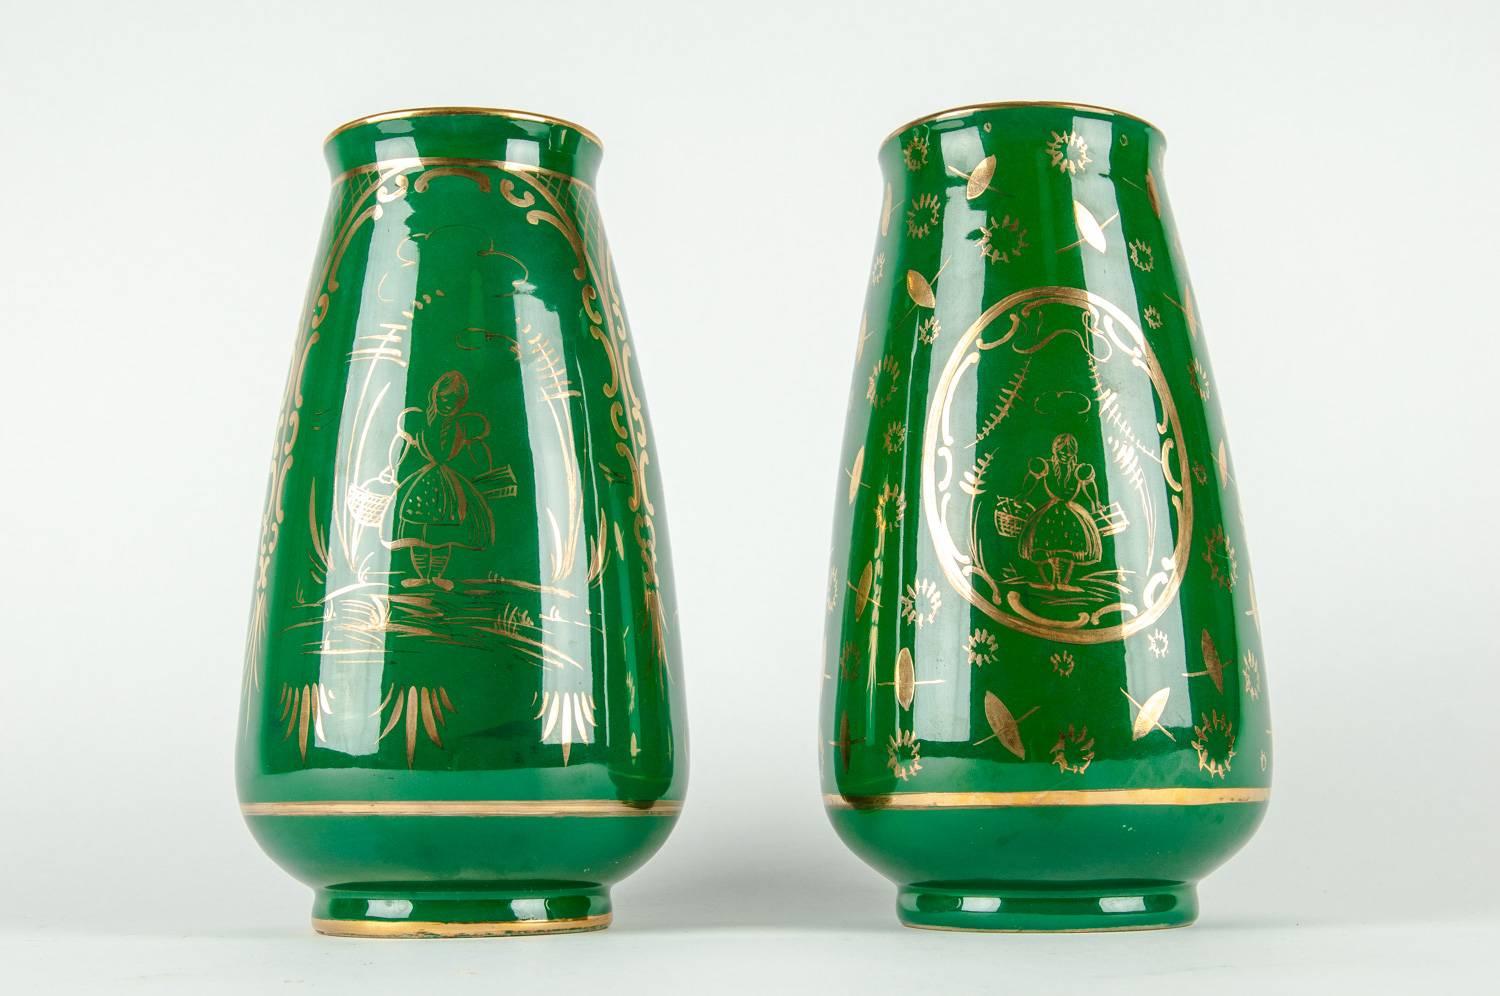 Vintage pair Italian porcelain decorative vases / pieces. Each vase is in excellent vintage condition. Maker's mark undersigned. Each vase measure about 10 inches high x 5 inches body diameter.